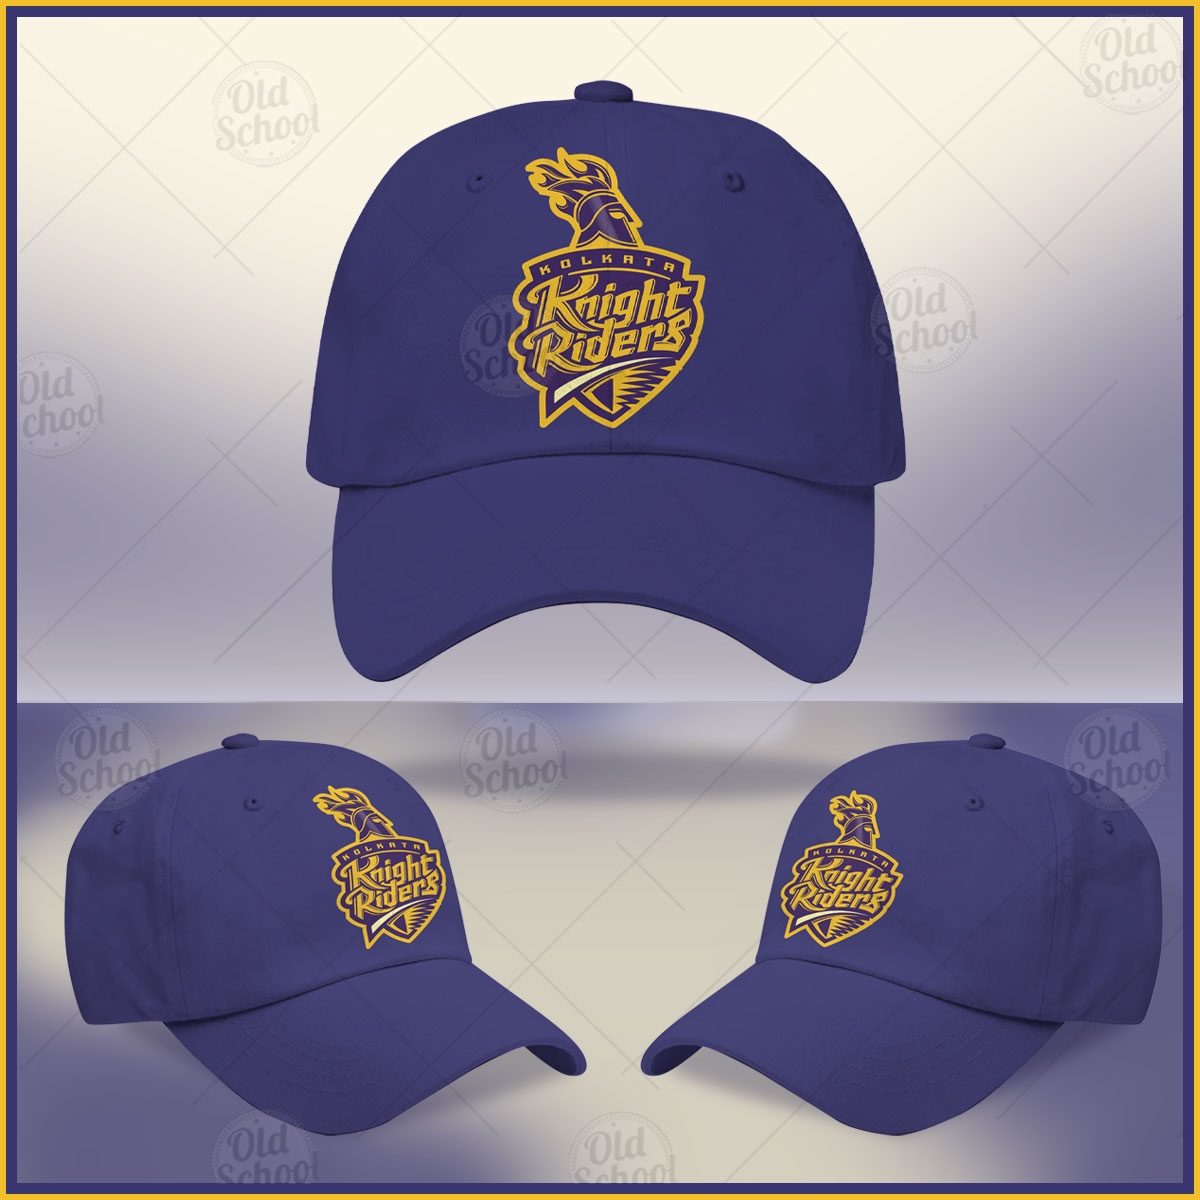 Quality Unisex IPL K Knight Riders Cricket Team Cap Free Size Pack of 2 US 